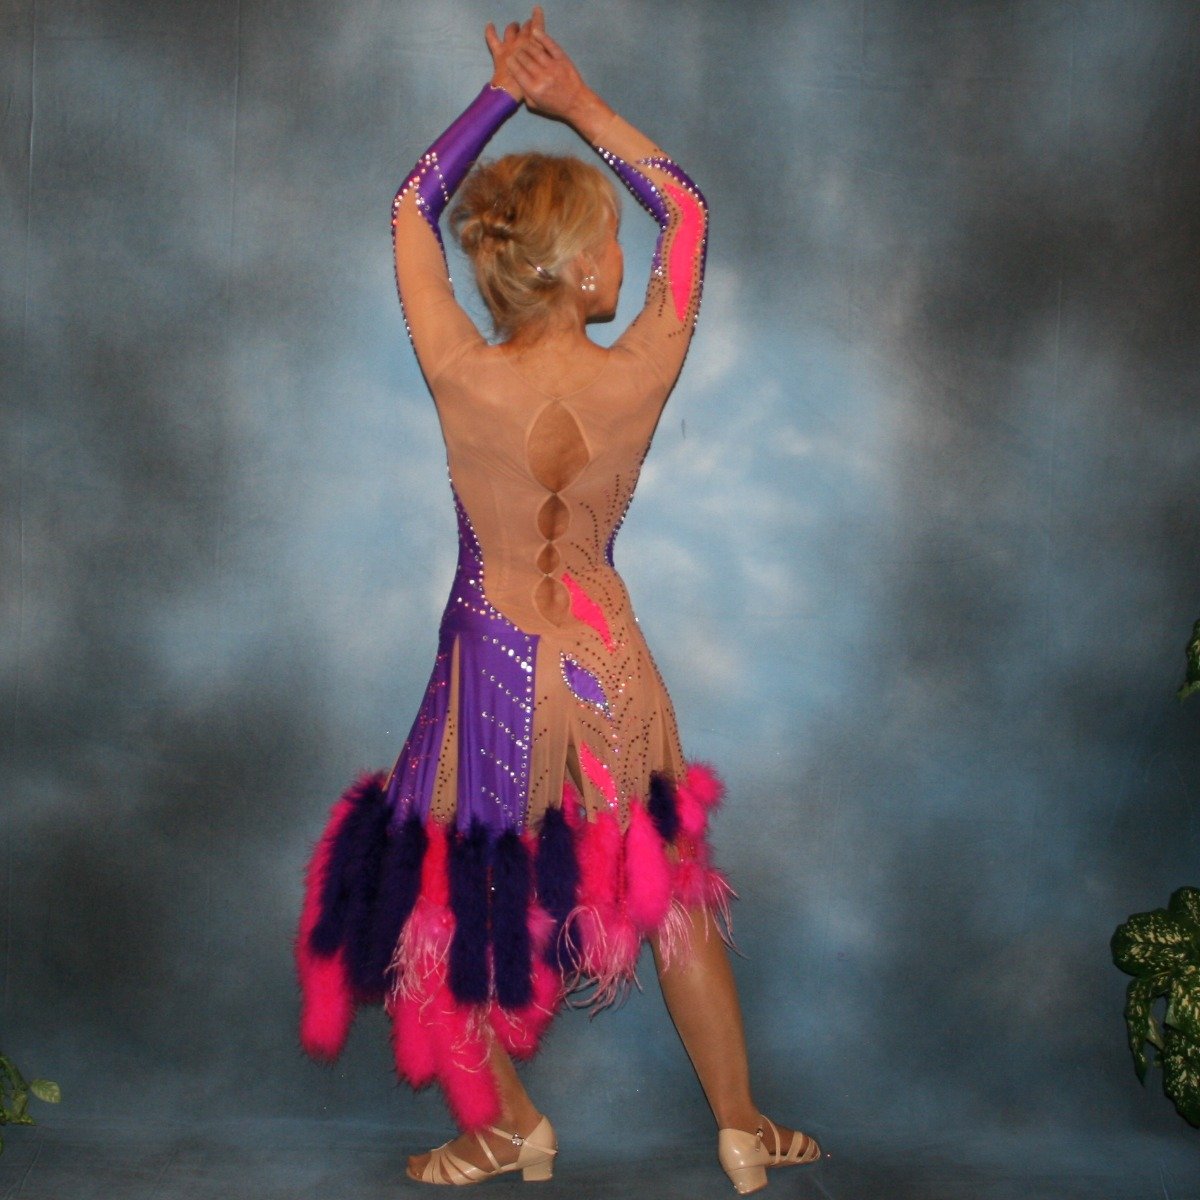 back view of back view of Crystal's Creations Purple & hot pink Latin/rhythm dress created of detailed artwork of purple & hot pink lycra on a nude illusion base, embellished with purple, fuchsia Swarovski rhinestone work, along with marabou feathers & hand beading.